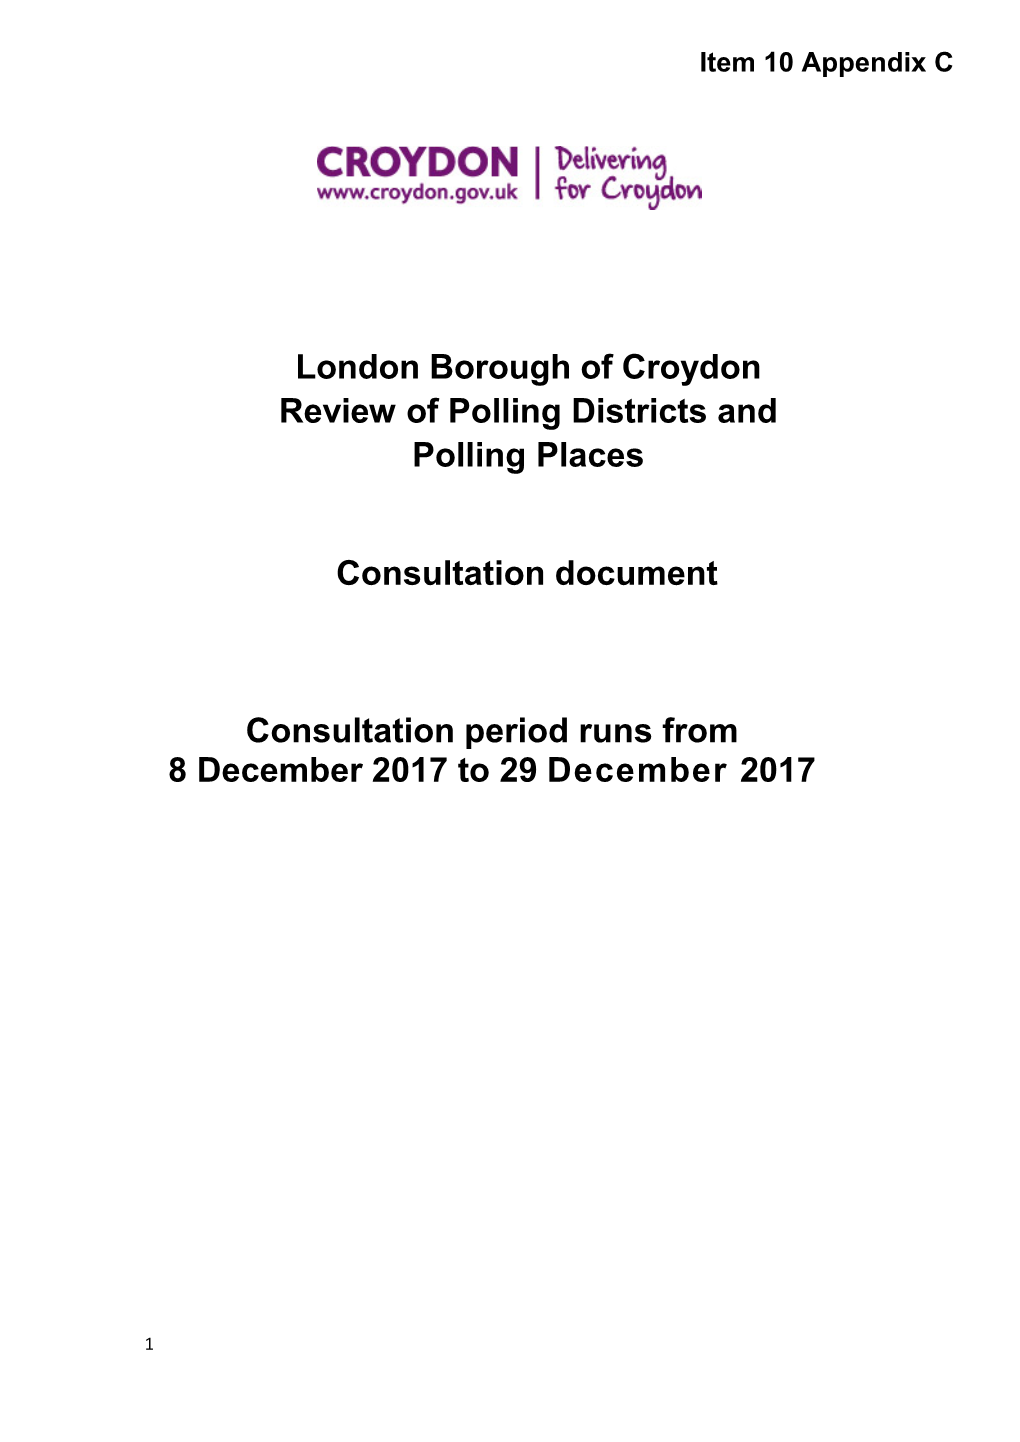 London Borough of Croydon Review of Polling Districts and Polling Places